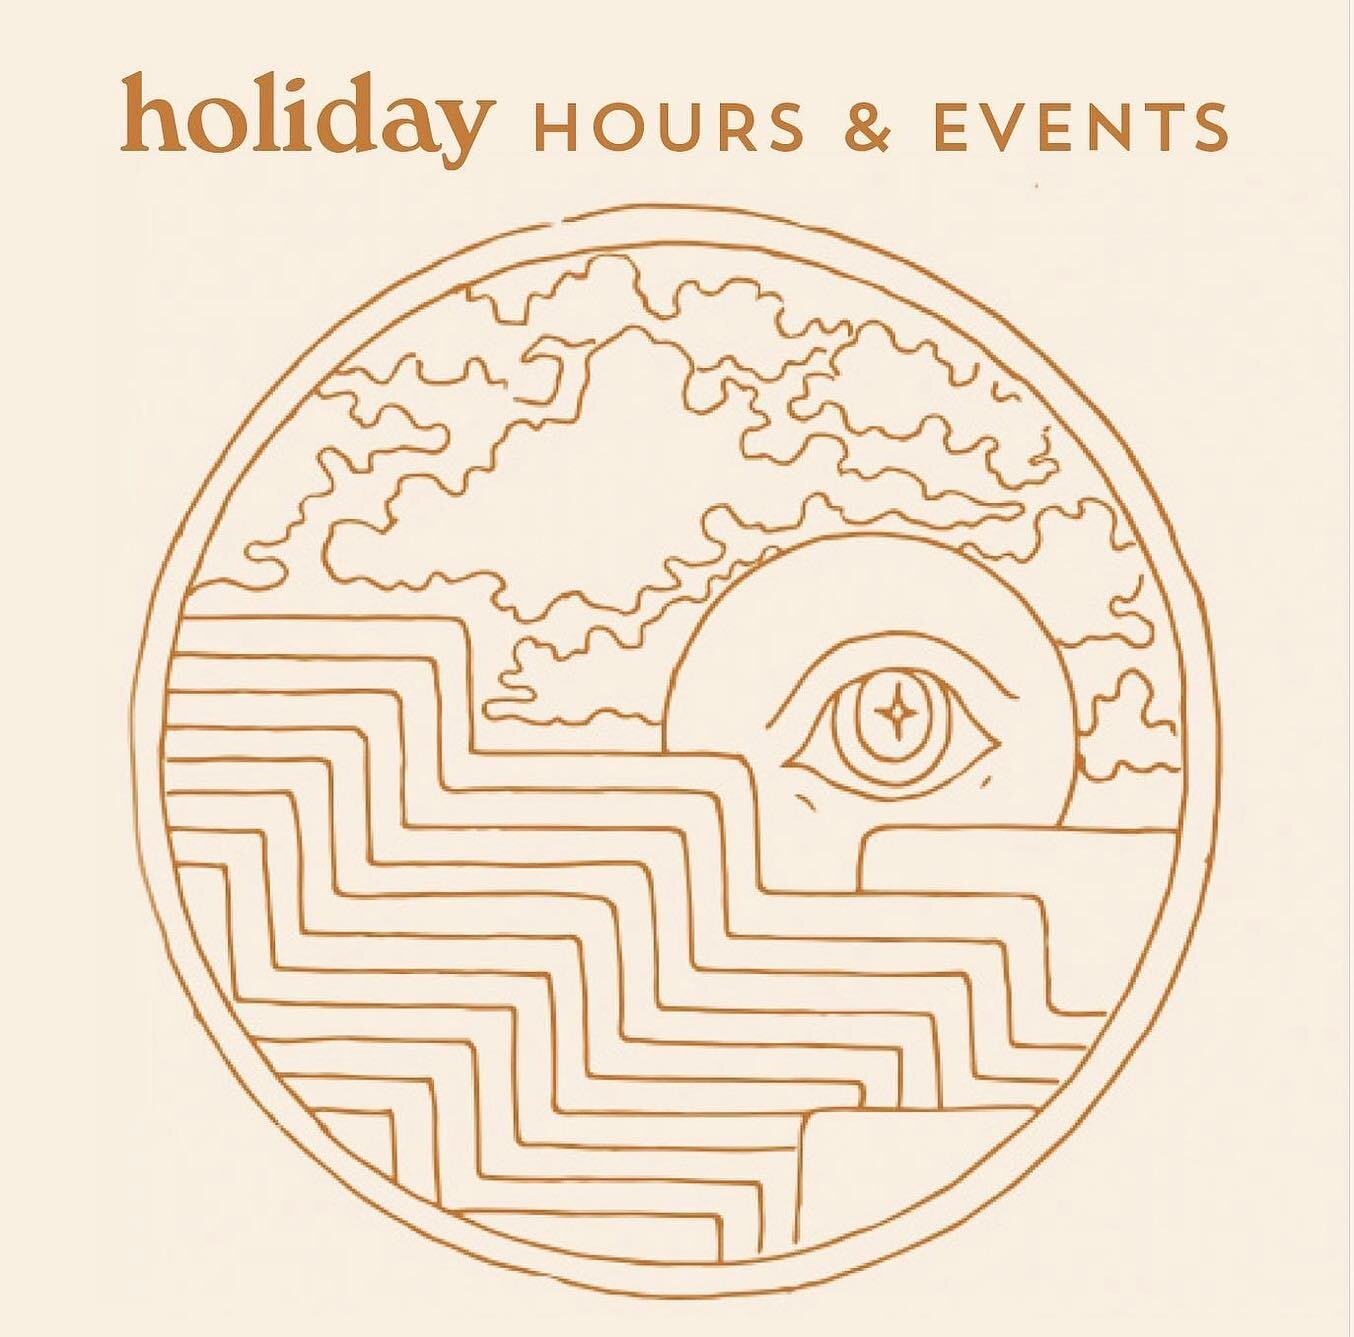 December hours and events ✨✌🏽✨

We&rsquo;re here when you need us. Open everyday until Christmas. Longer hours. Heaps of gifts to choose from. And gifting all the sparkles this season to celebrate a decade with you!

Looking forward to seeing you so